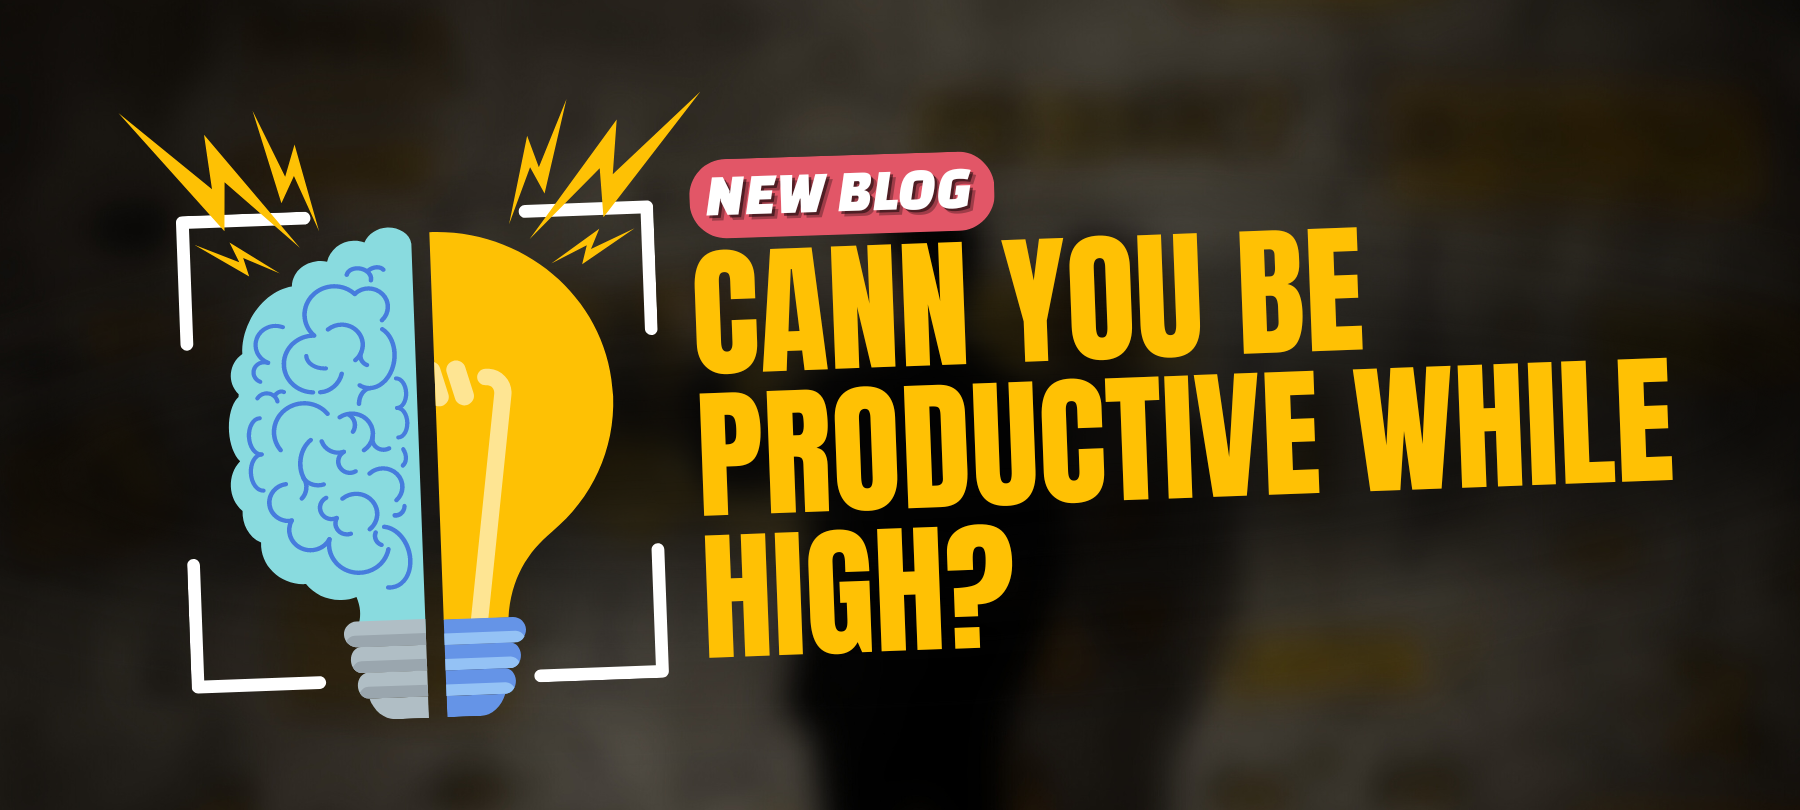 Cann you be productive while high?